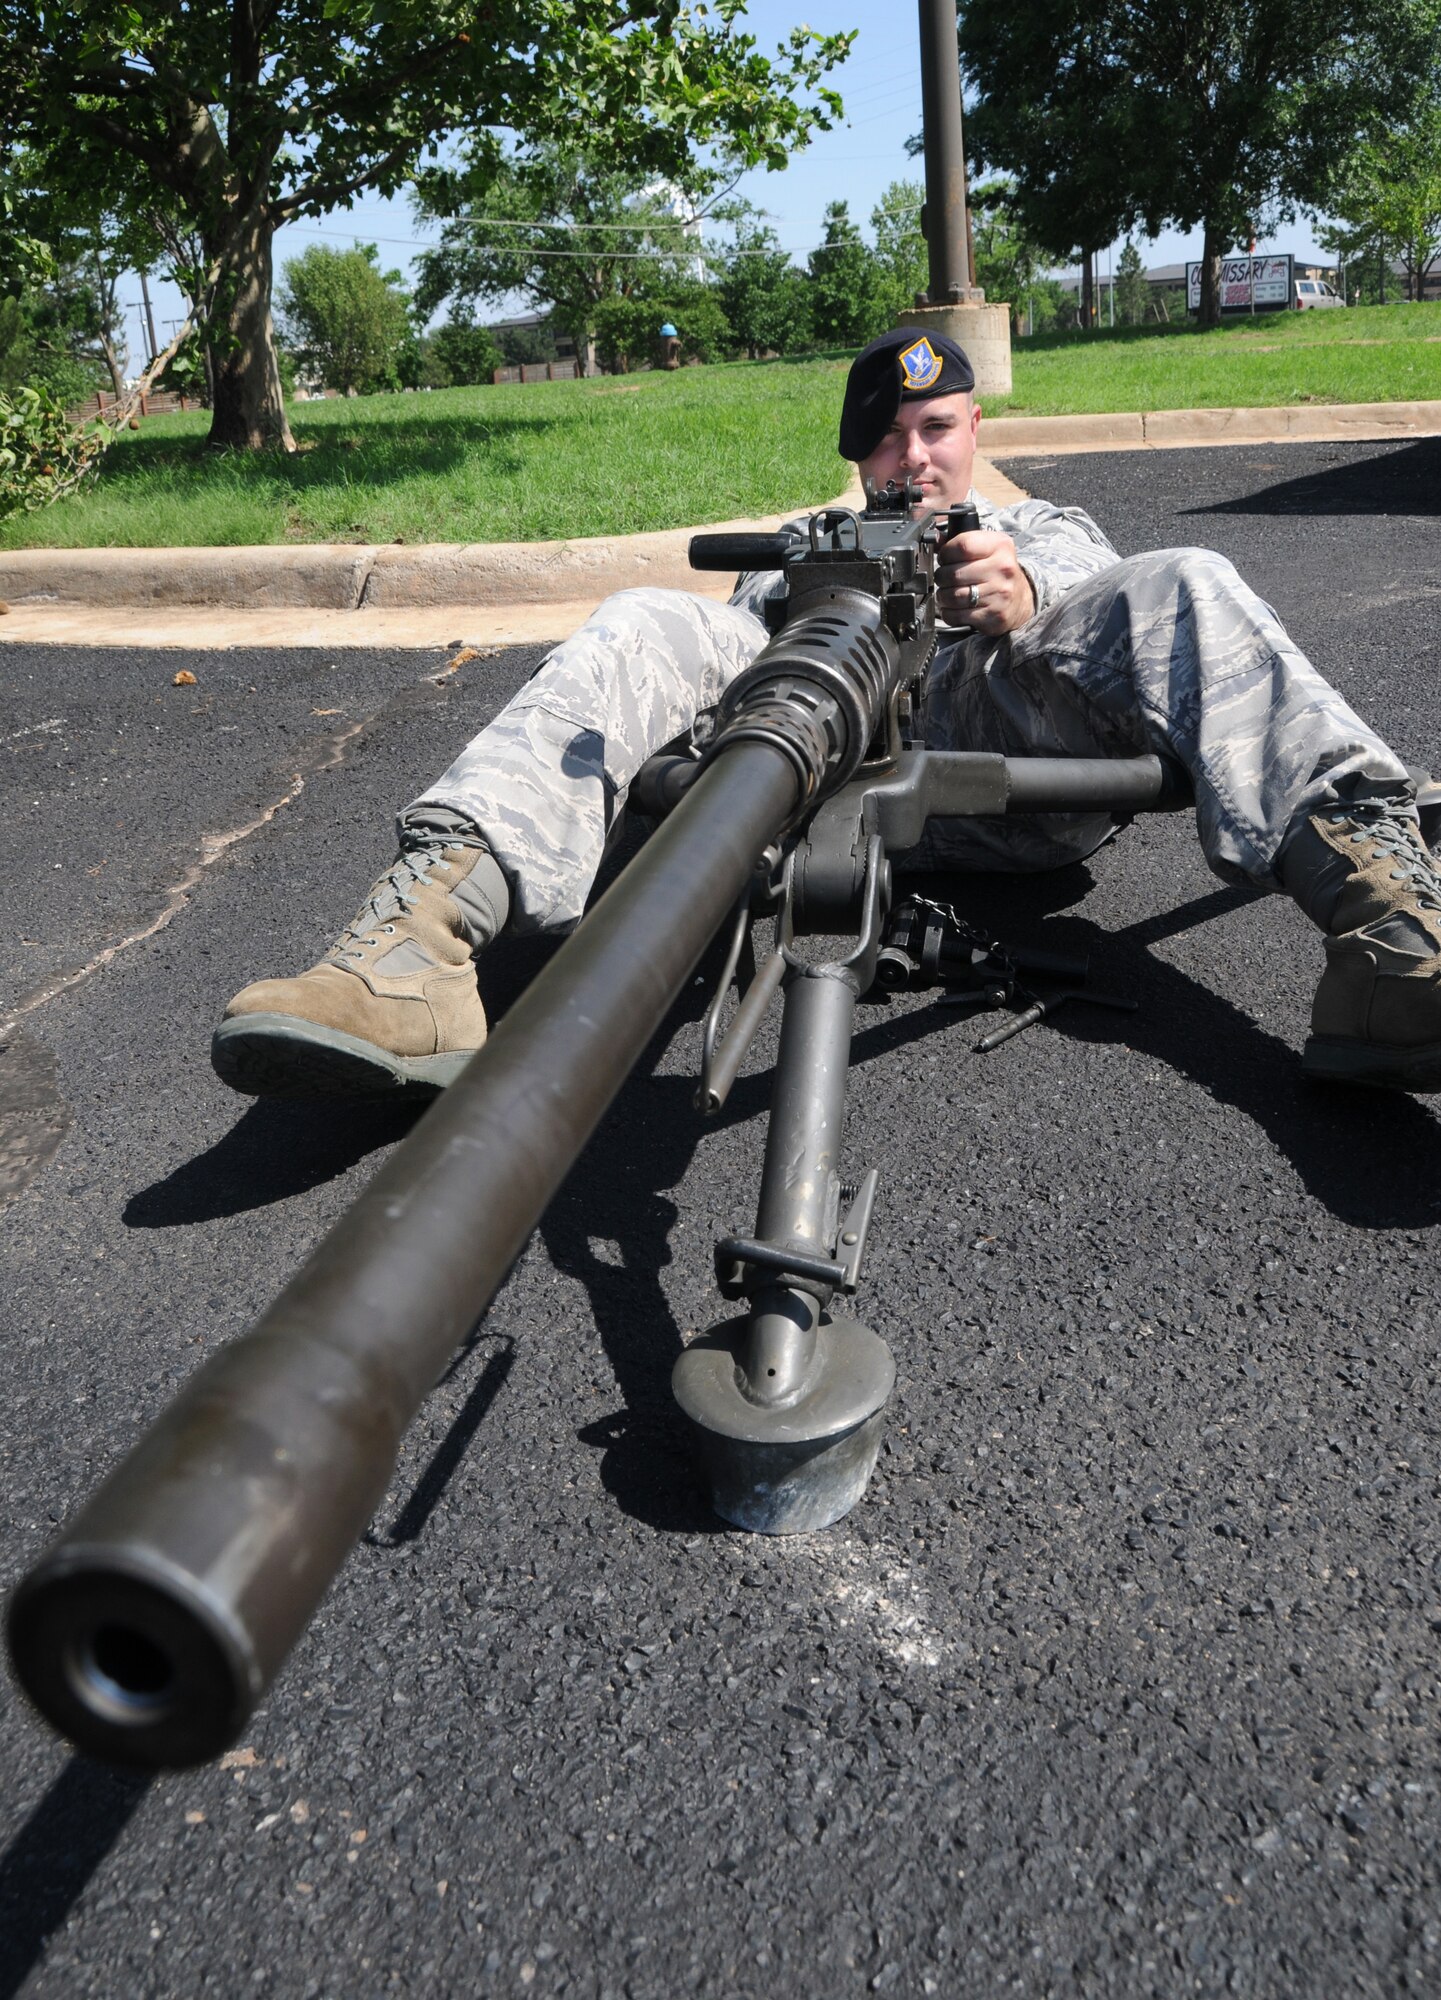 ALTUS AIR FORCE BASE, Okla --- Staff Sgt.  Matthew Treadwell, from the 97th Security Forces Squadron, simulates the use of an M-2 (50 cal) for police week at the Base Exchange parking lot on 13 May. This is the primary weapon used when traveling on convoy, and has an extremely long firing range.  (U.S. Air Force photo by Senior Airmen Cherice Bryant)
